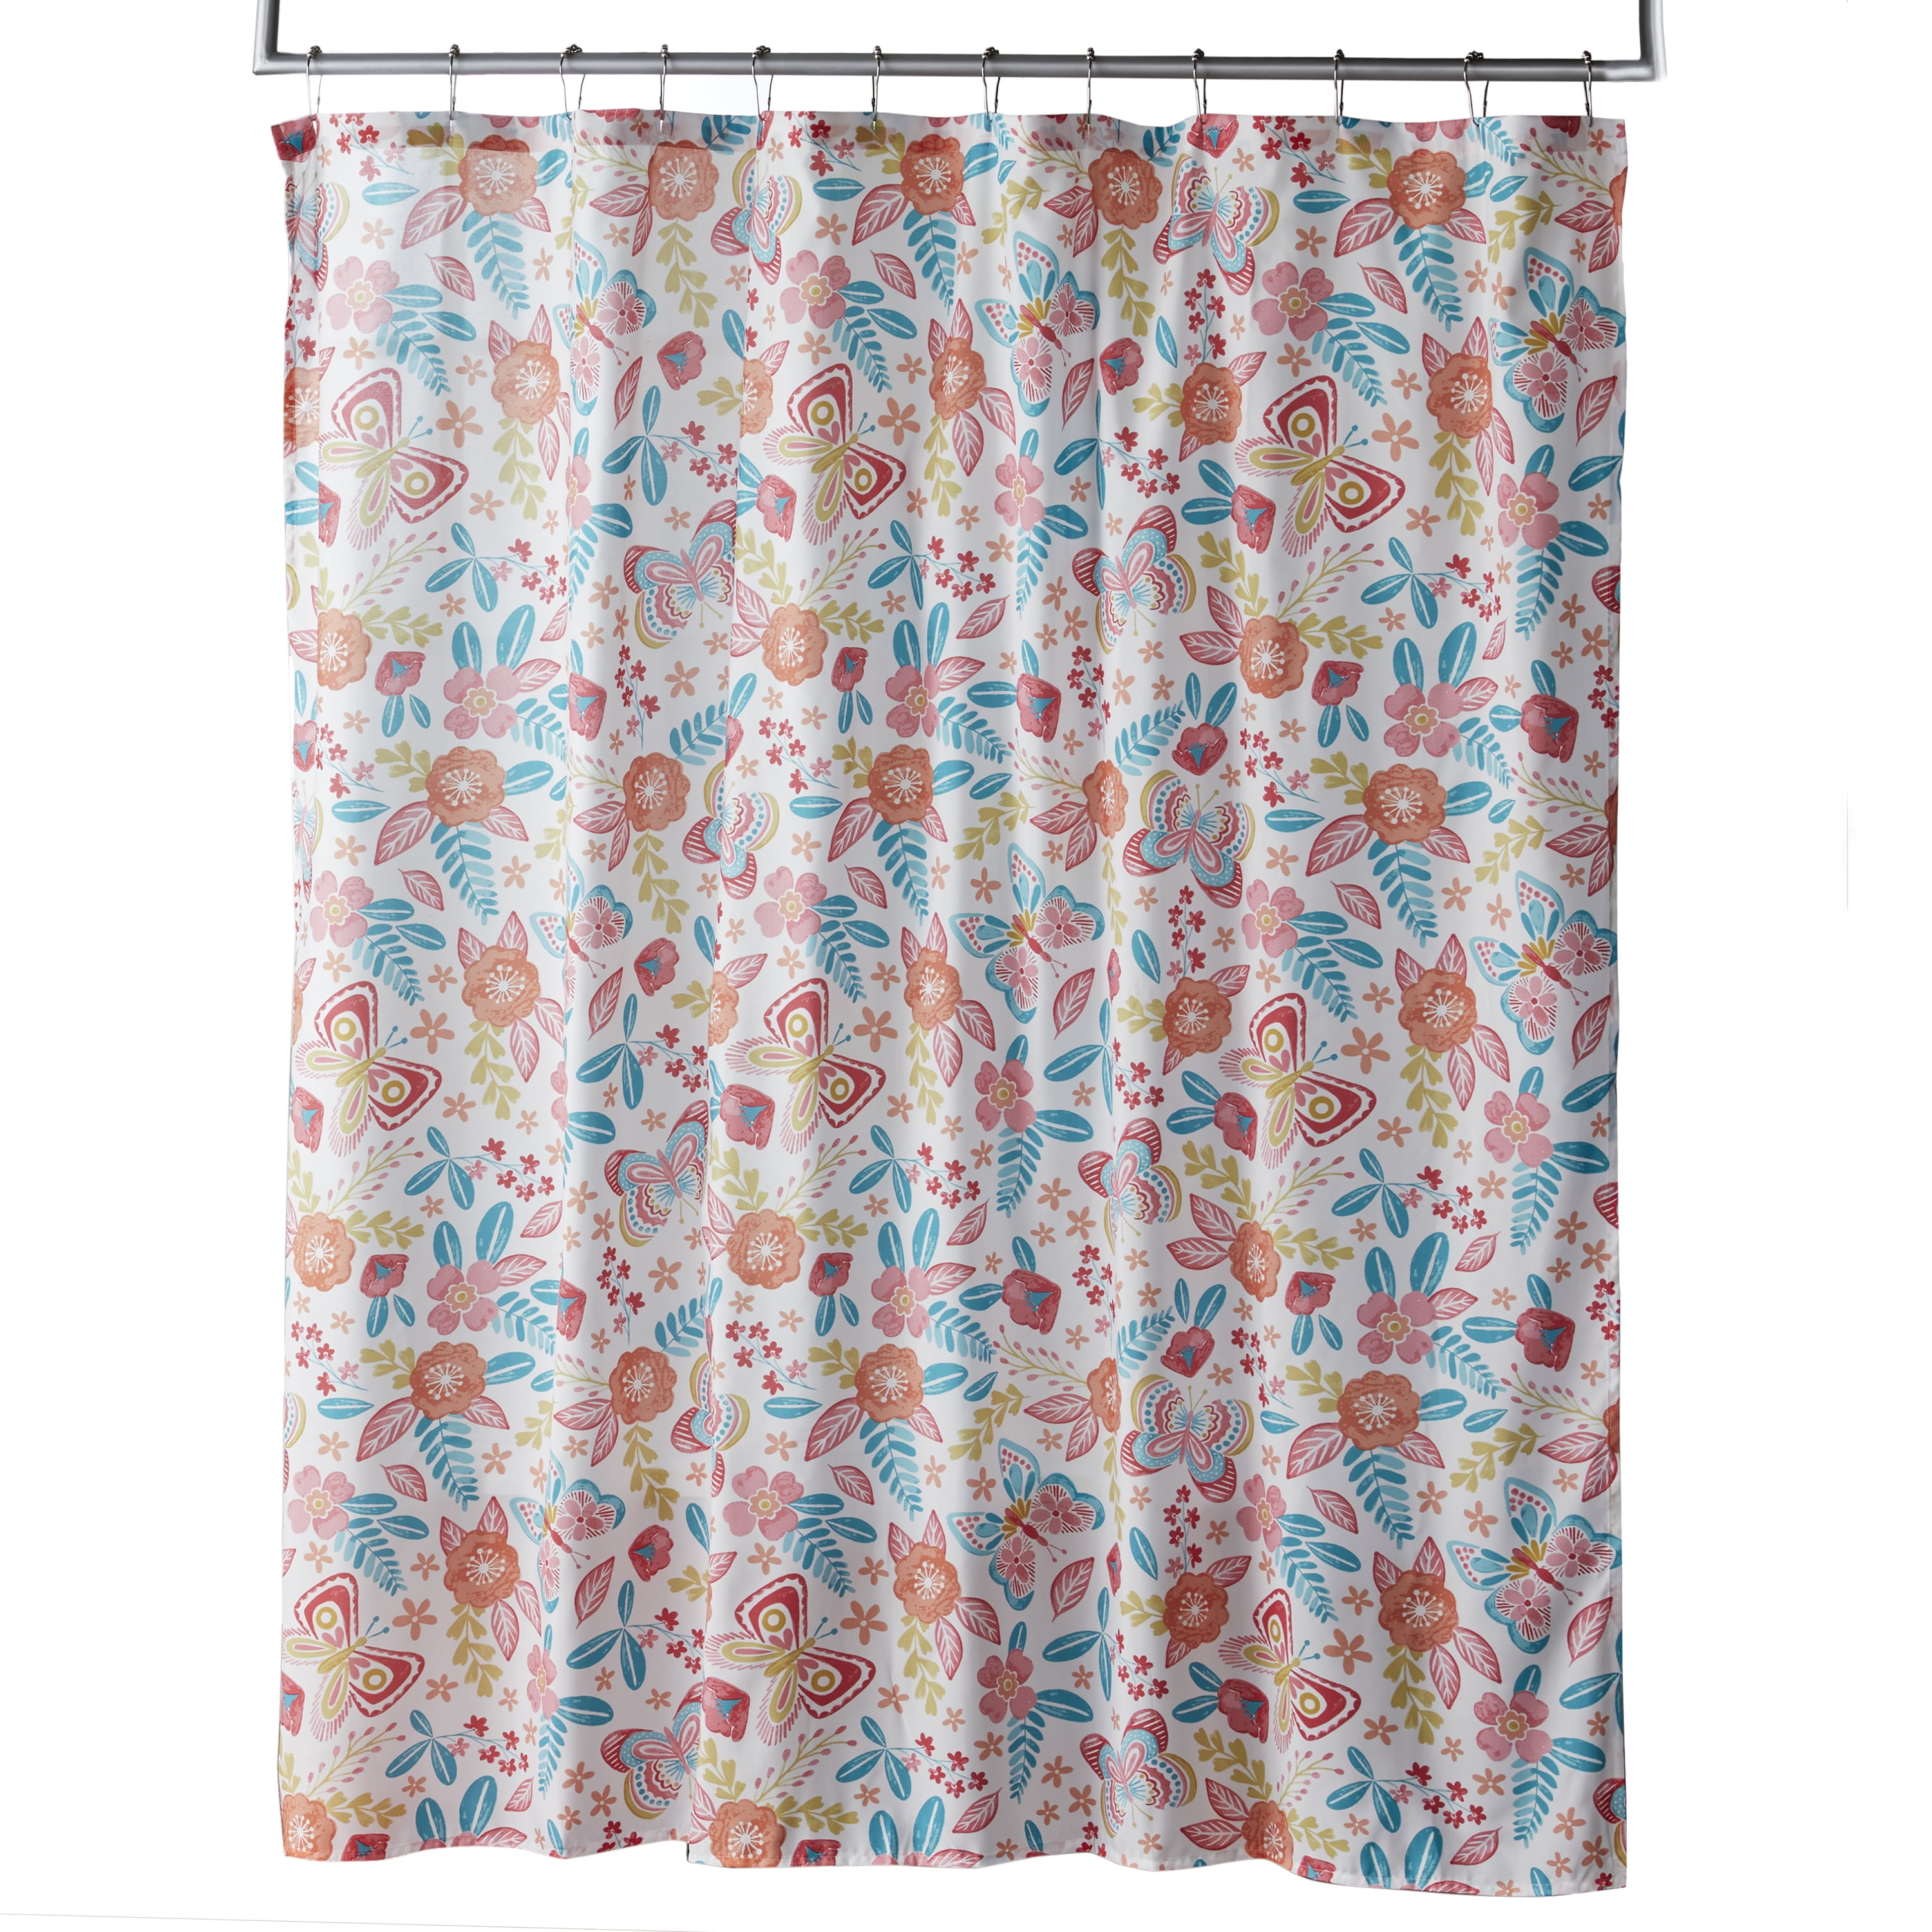 Details about   Dodou Digital Printing Shower Curtain Colorful Butterfly Pattern Waterproof Poly 